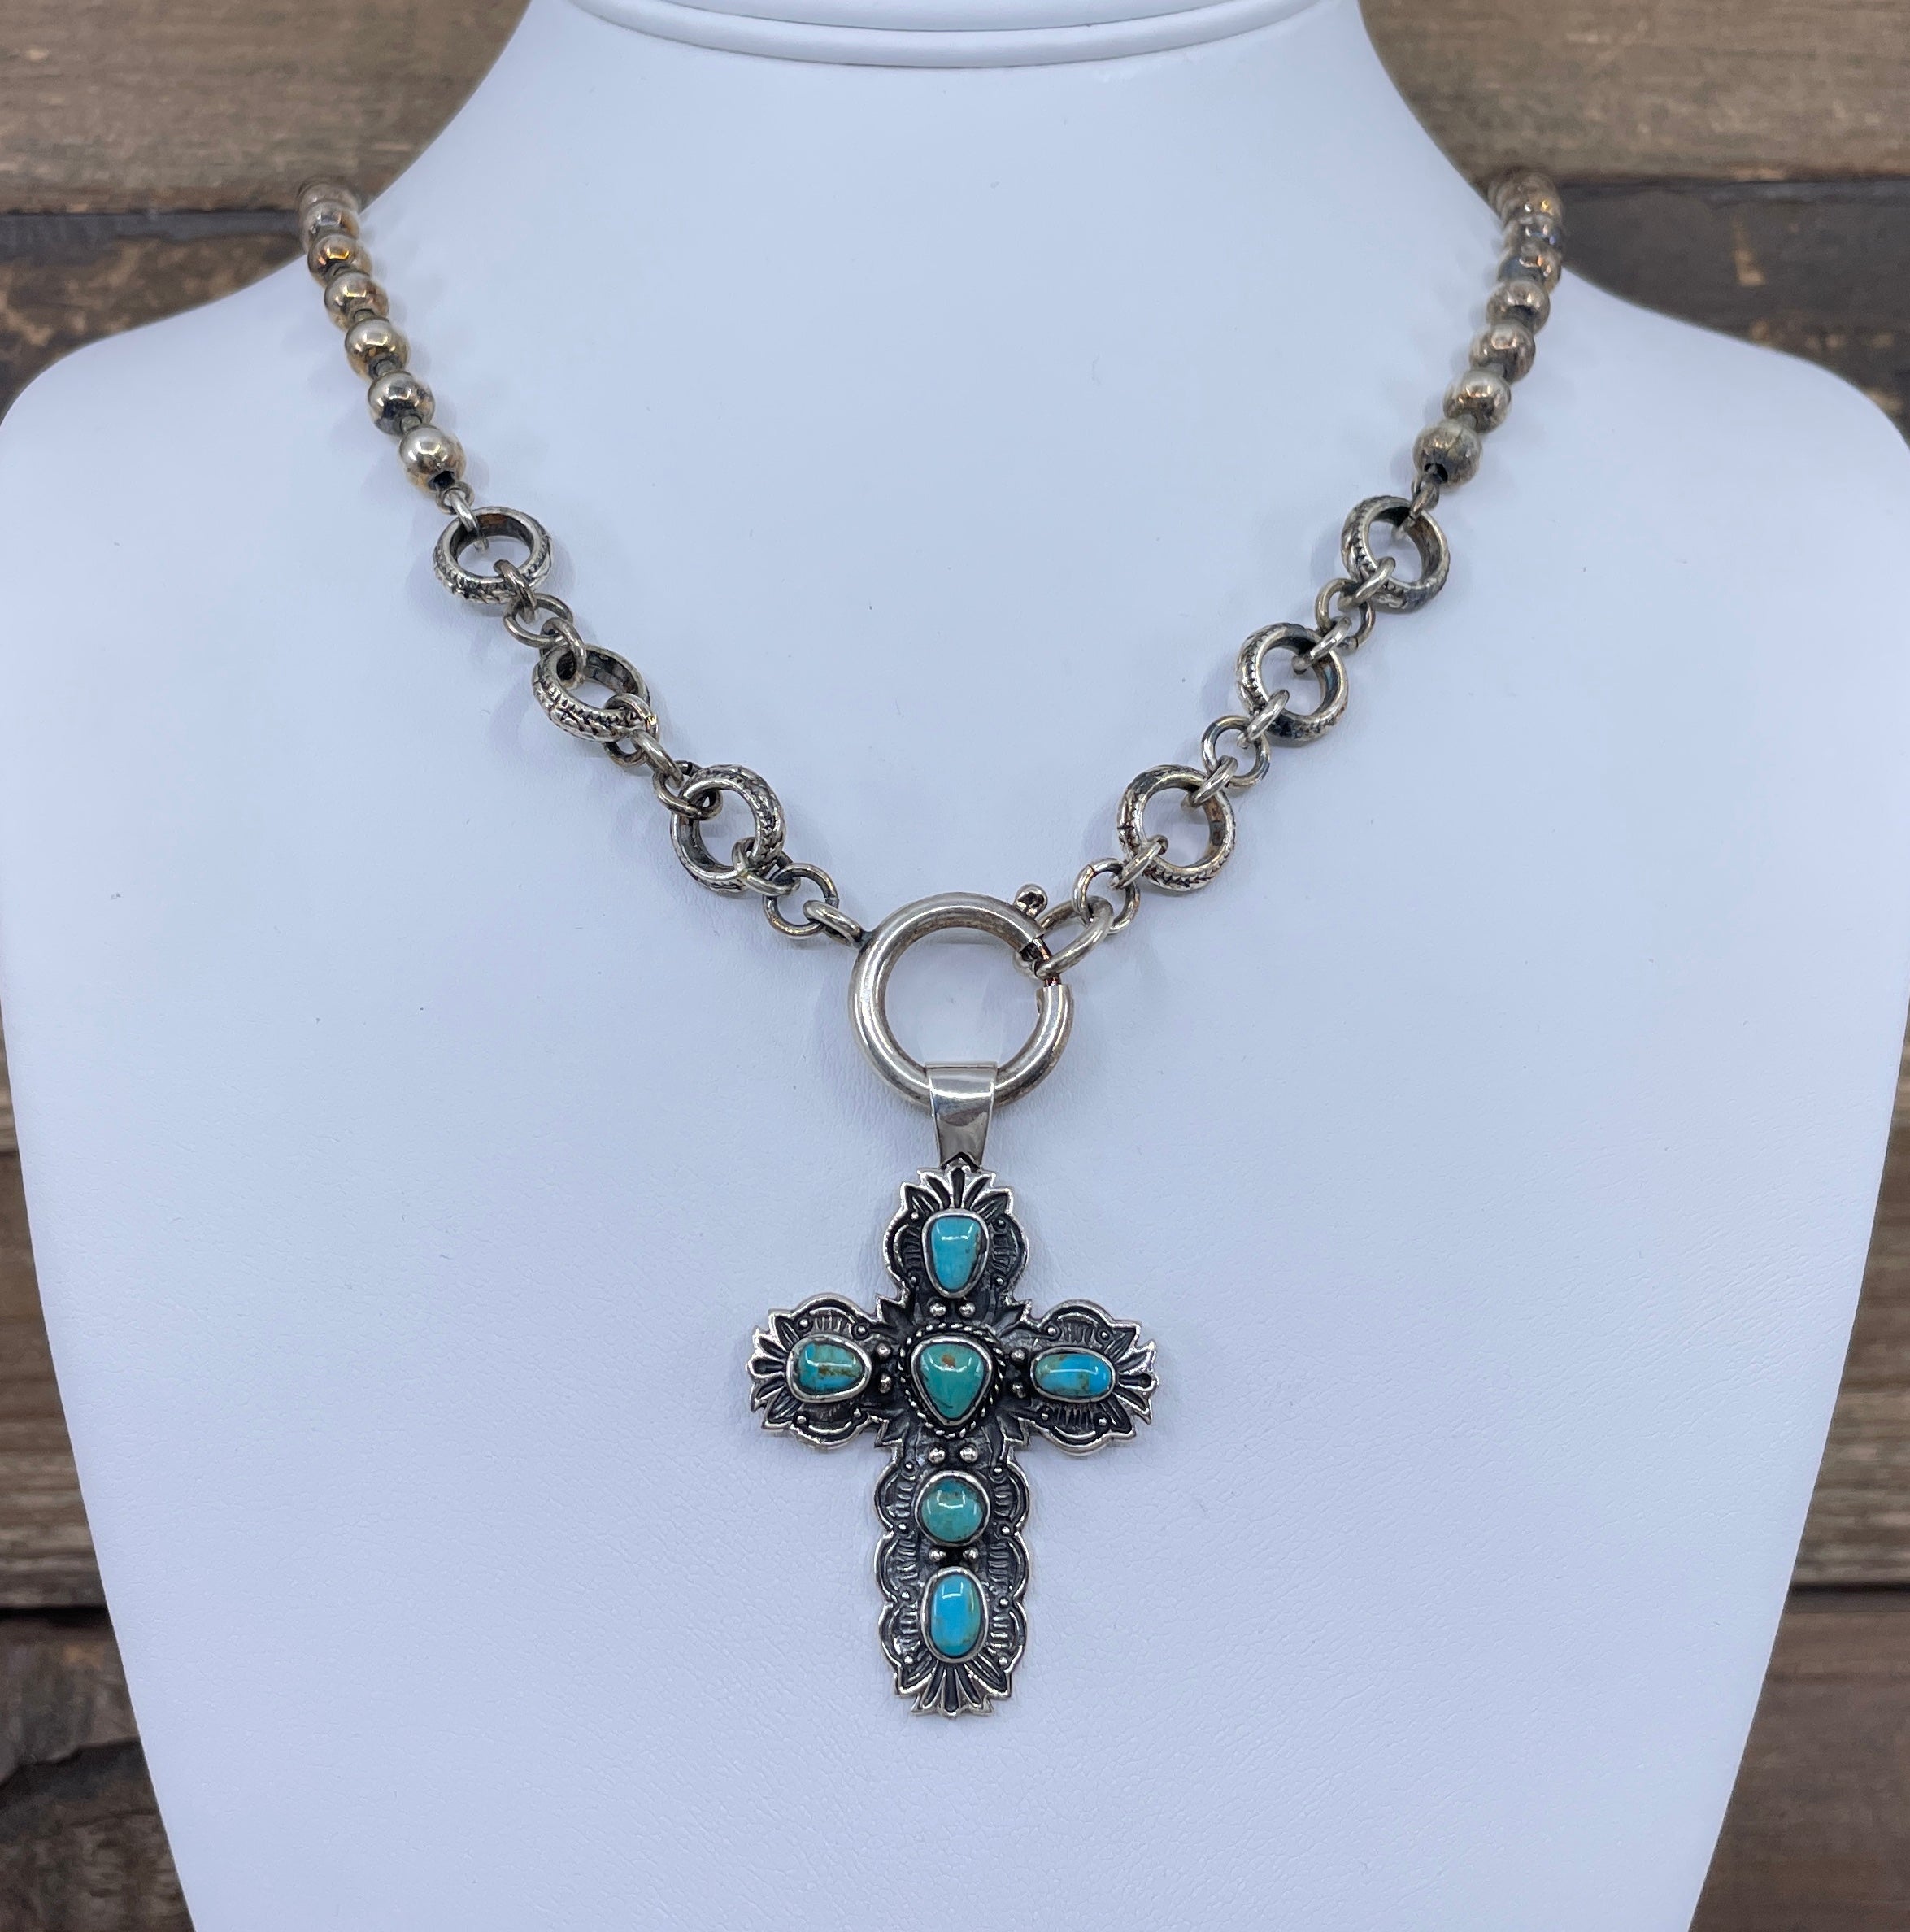 Vintage Sterling Plated Chain with Vintage Sterling & Turquoise Cross